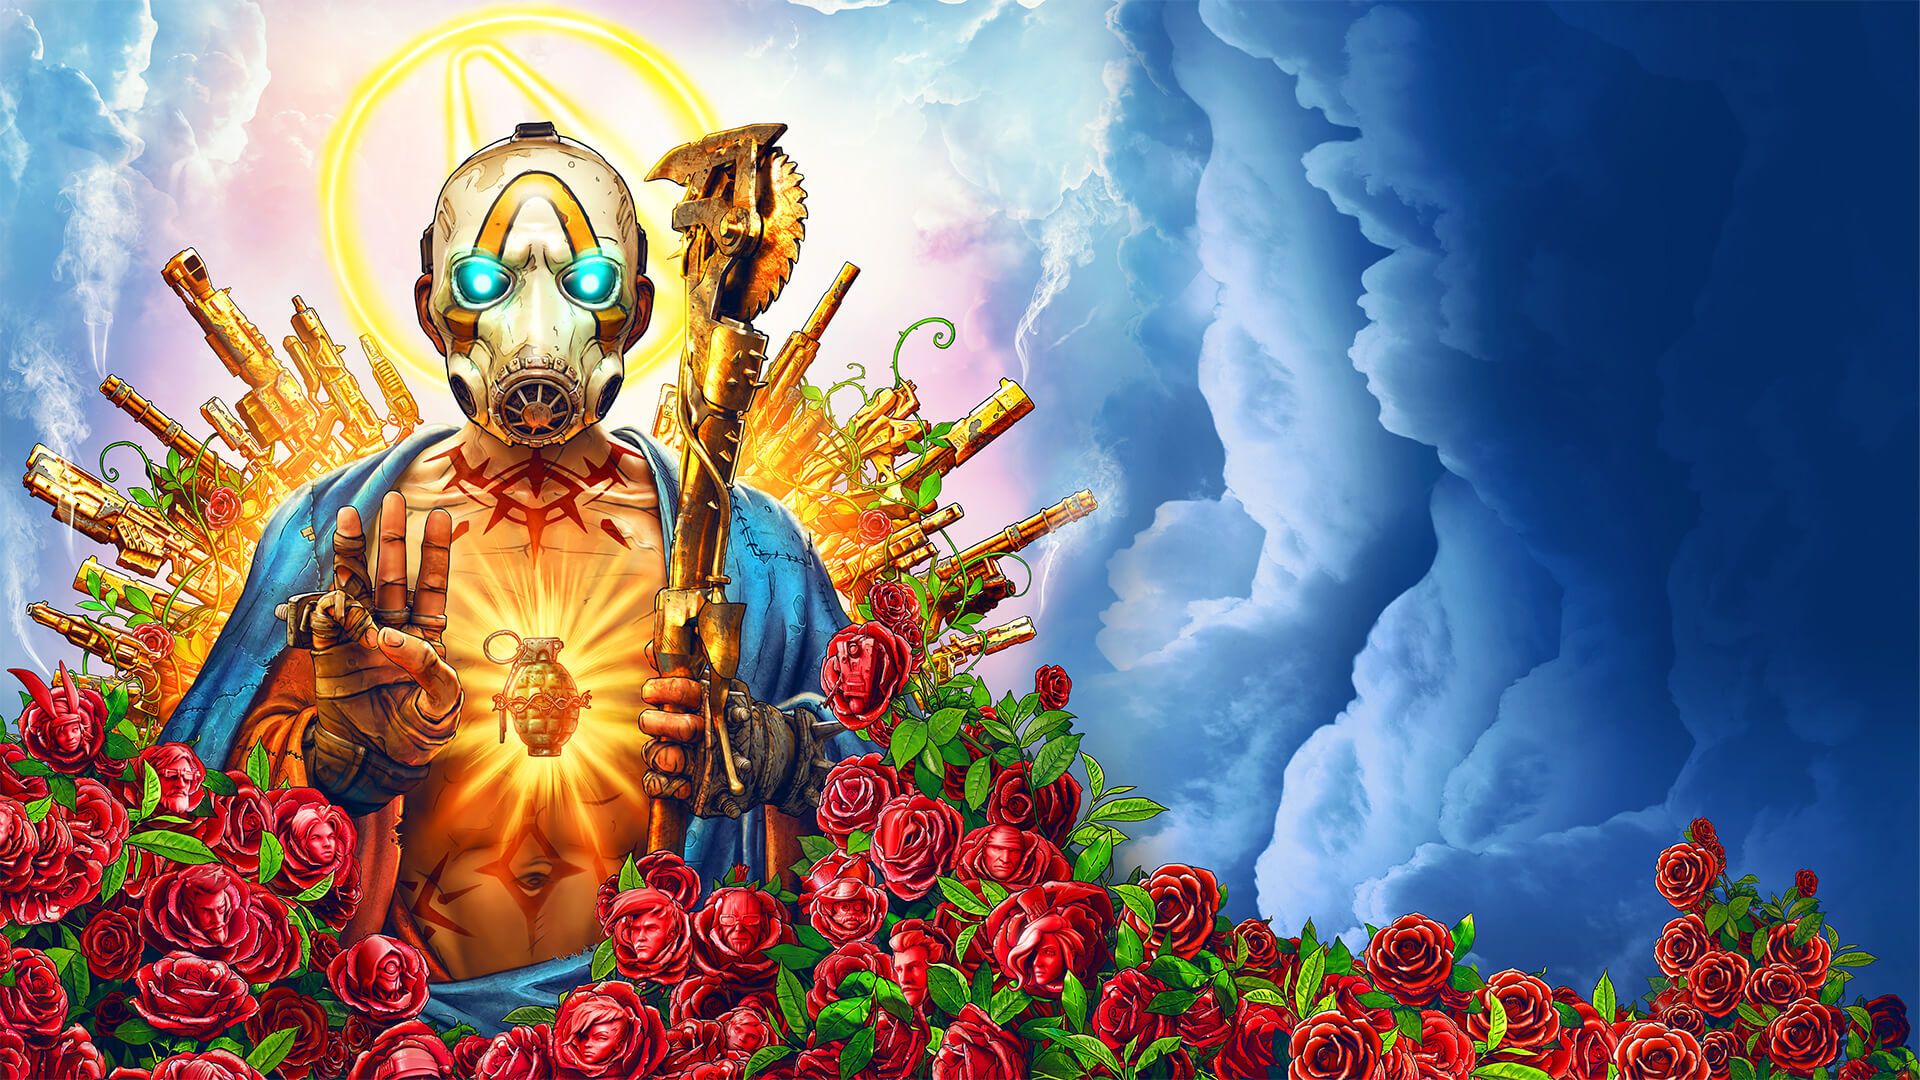 Borderlands 3: The Review